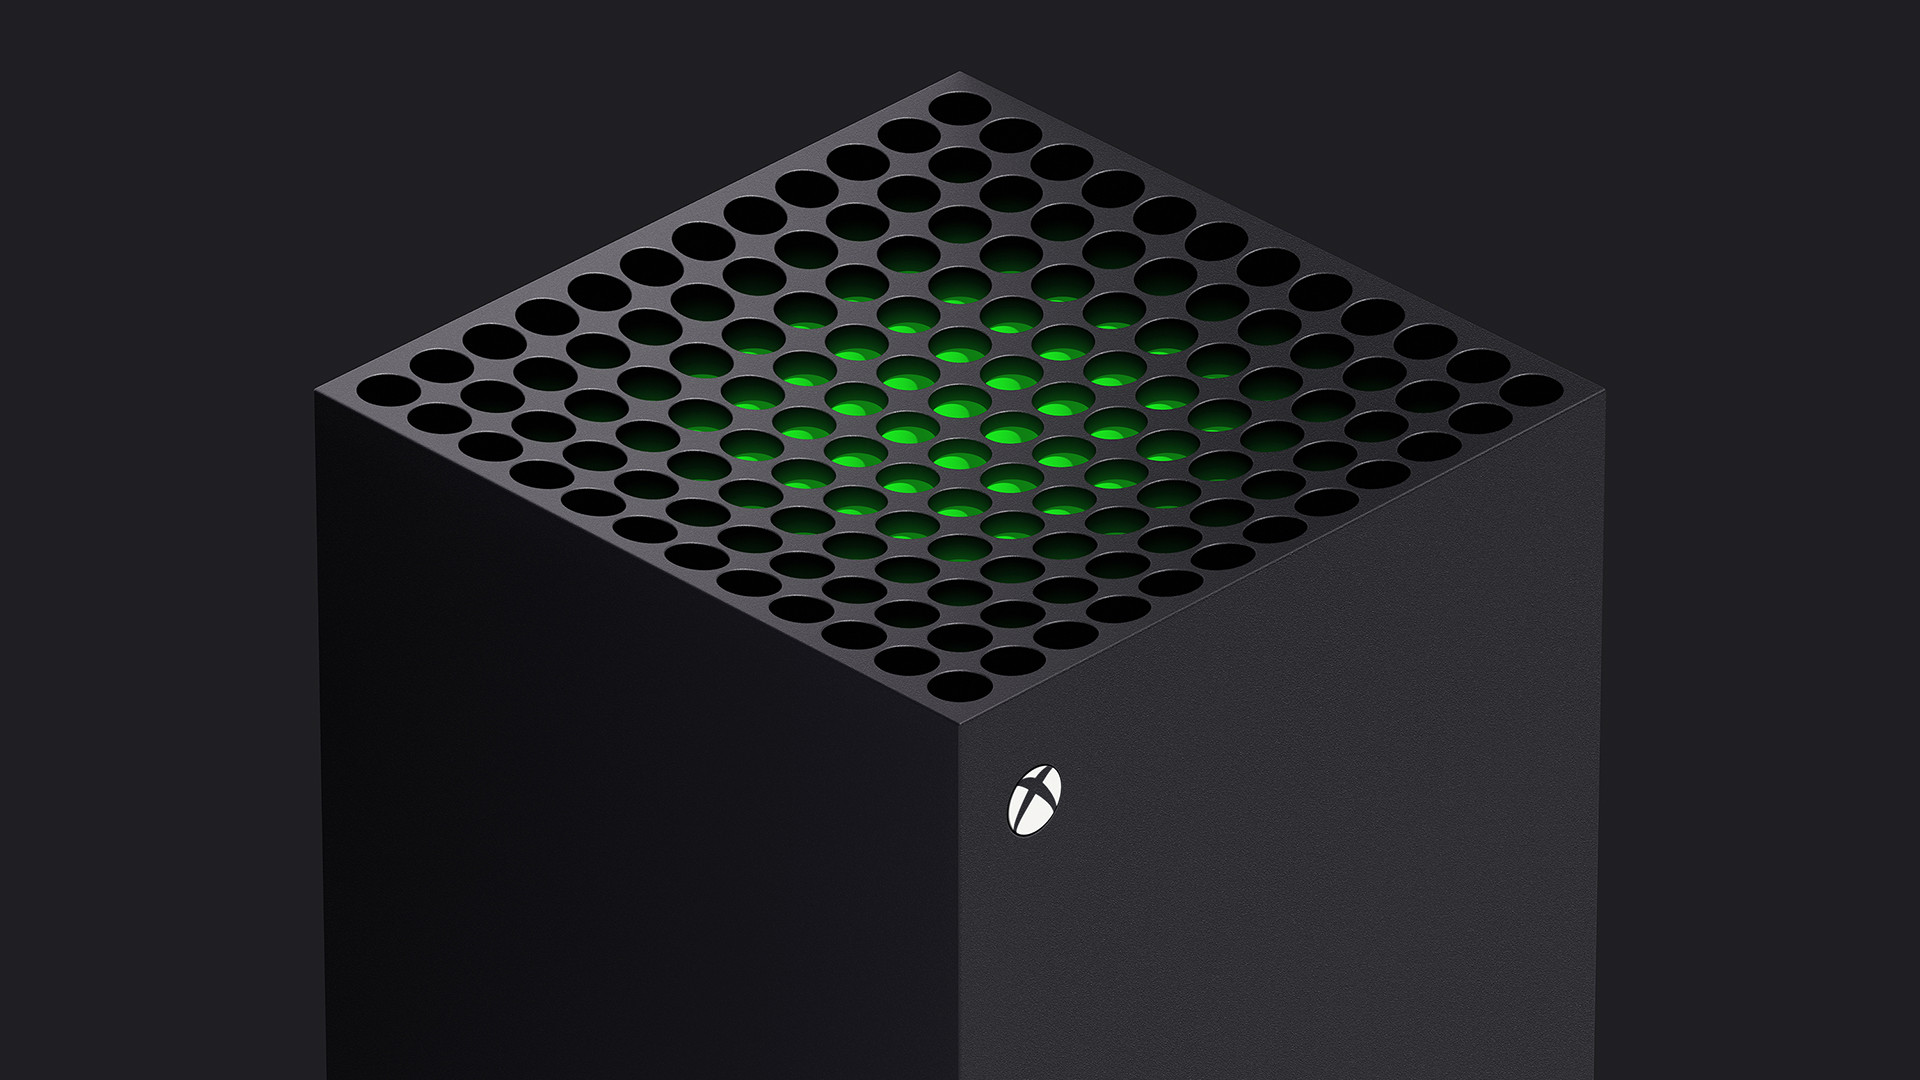 Listen to what the Xbox Series X's boot-up sounds like